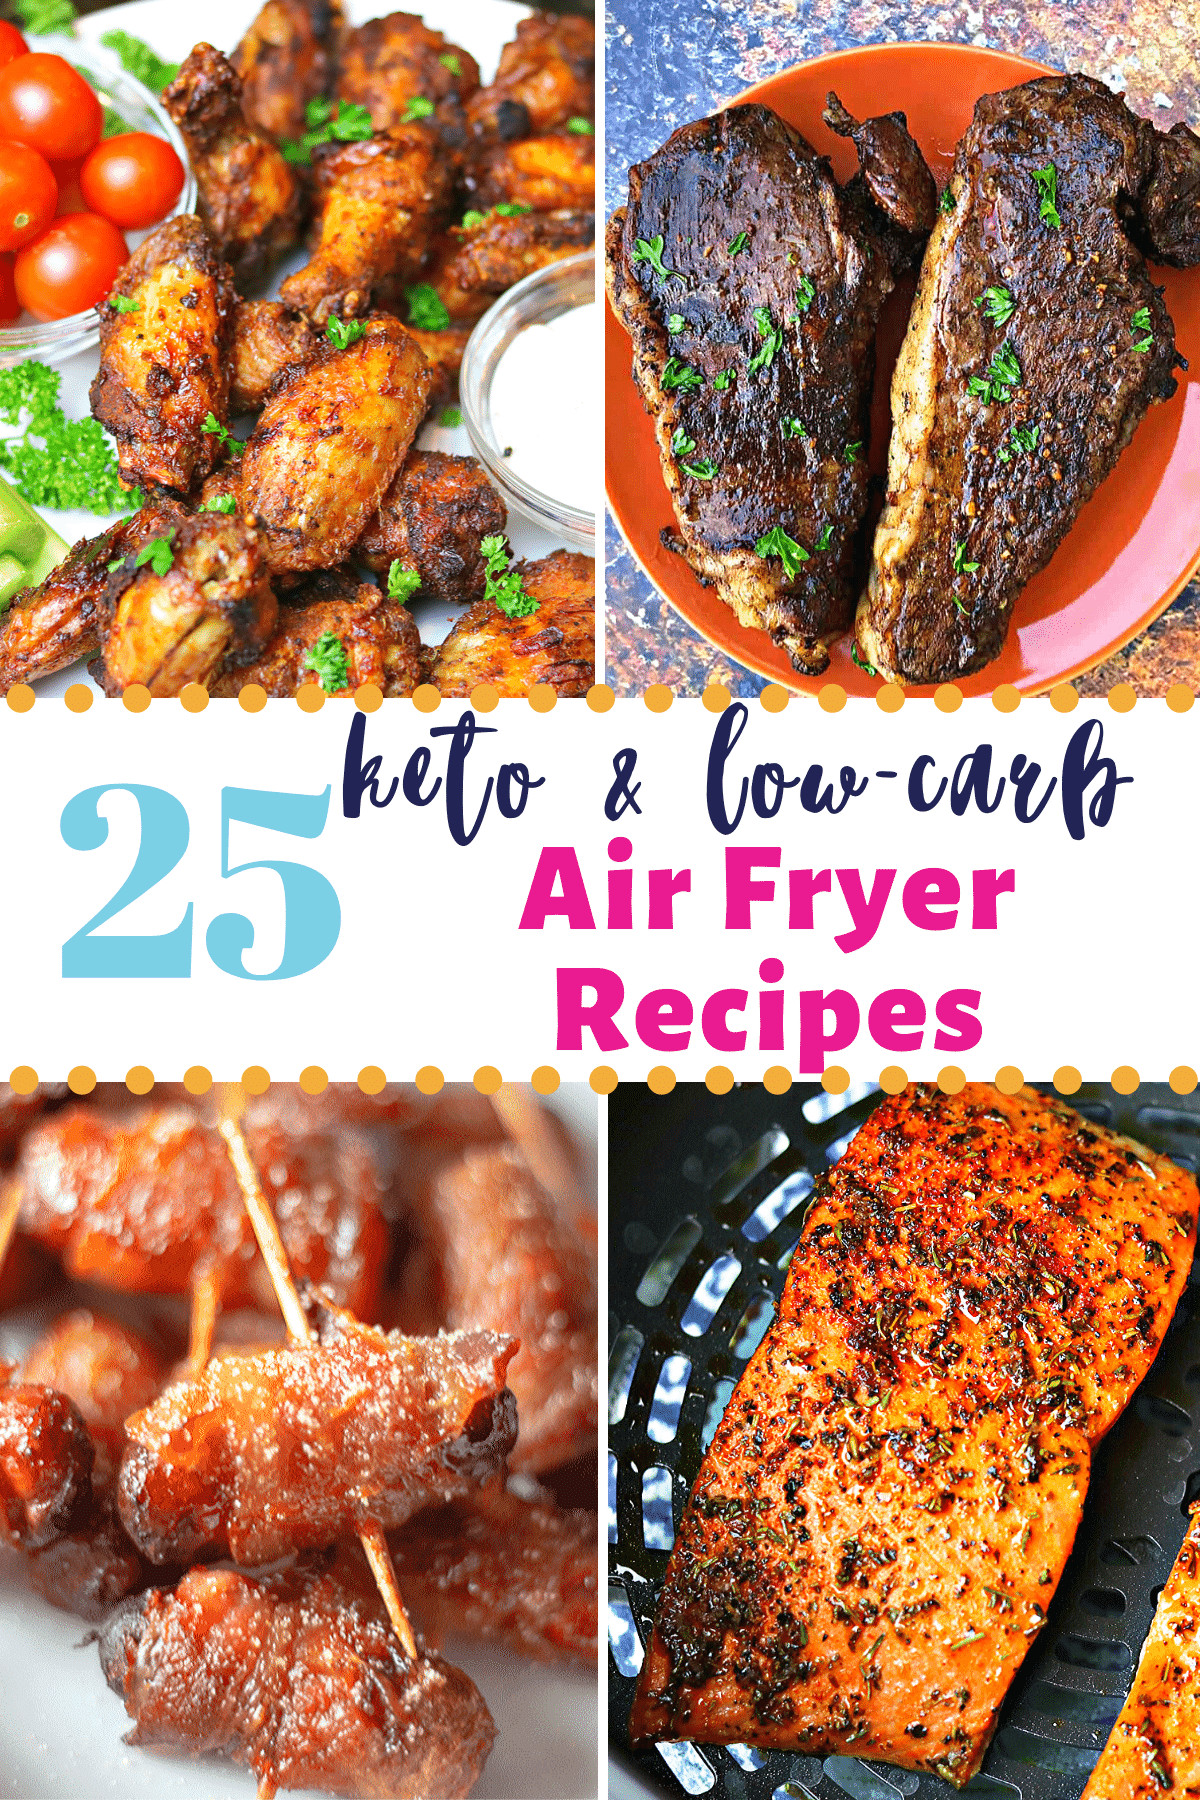 Air Fryer Keto Dinner
 25 Easy Low carb & Keto Air Fryer Recipes for Every Meal